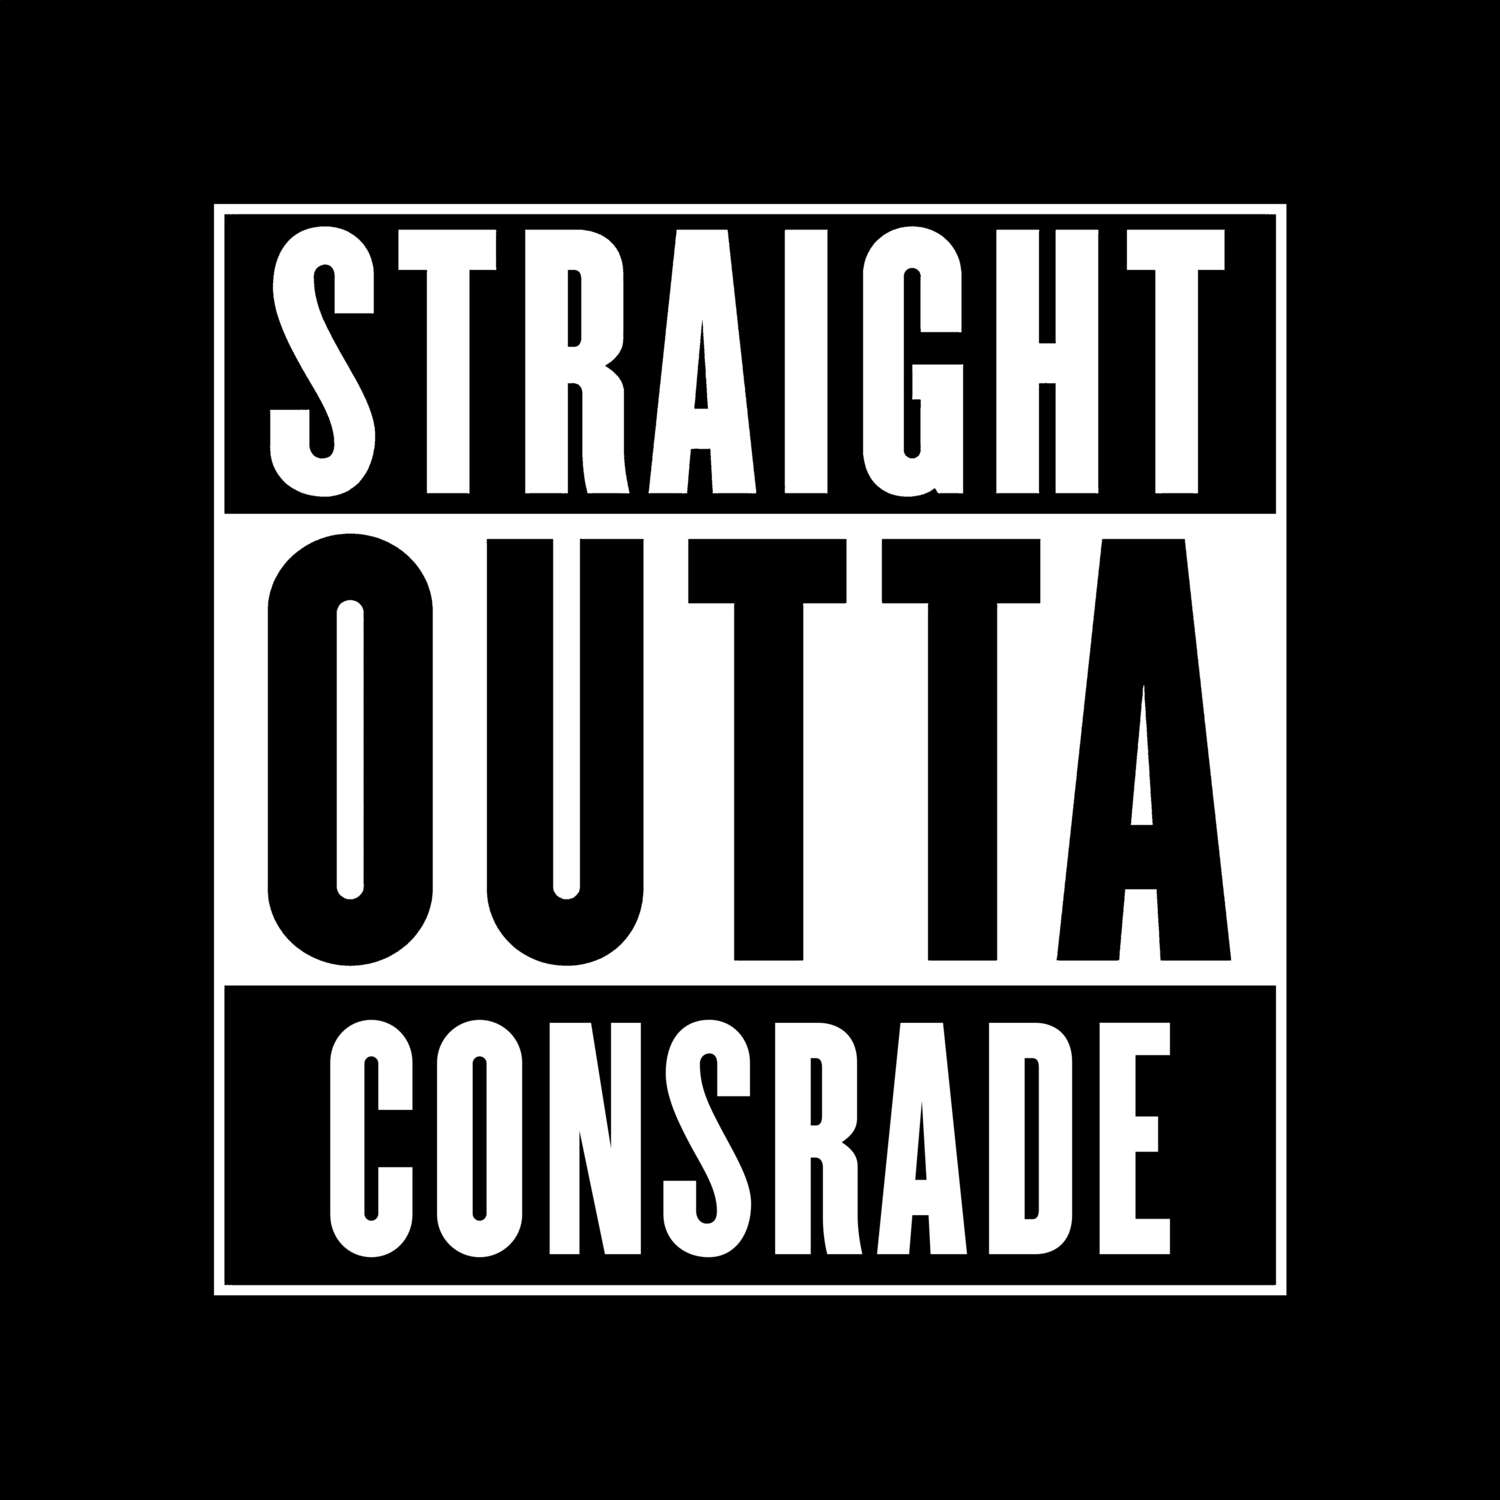 Consrade T-Shirt »Straight Outta«